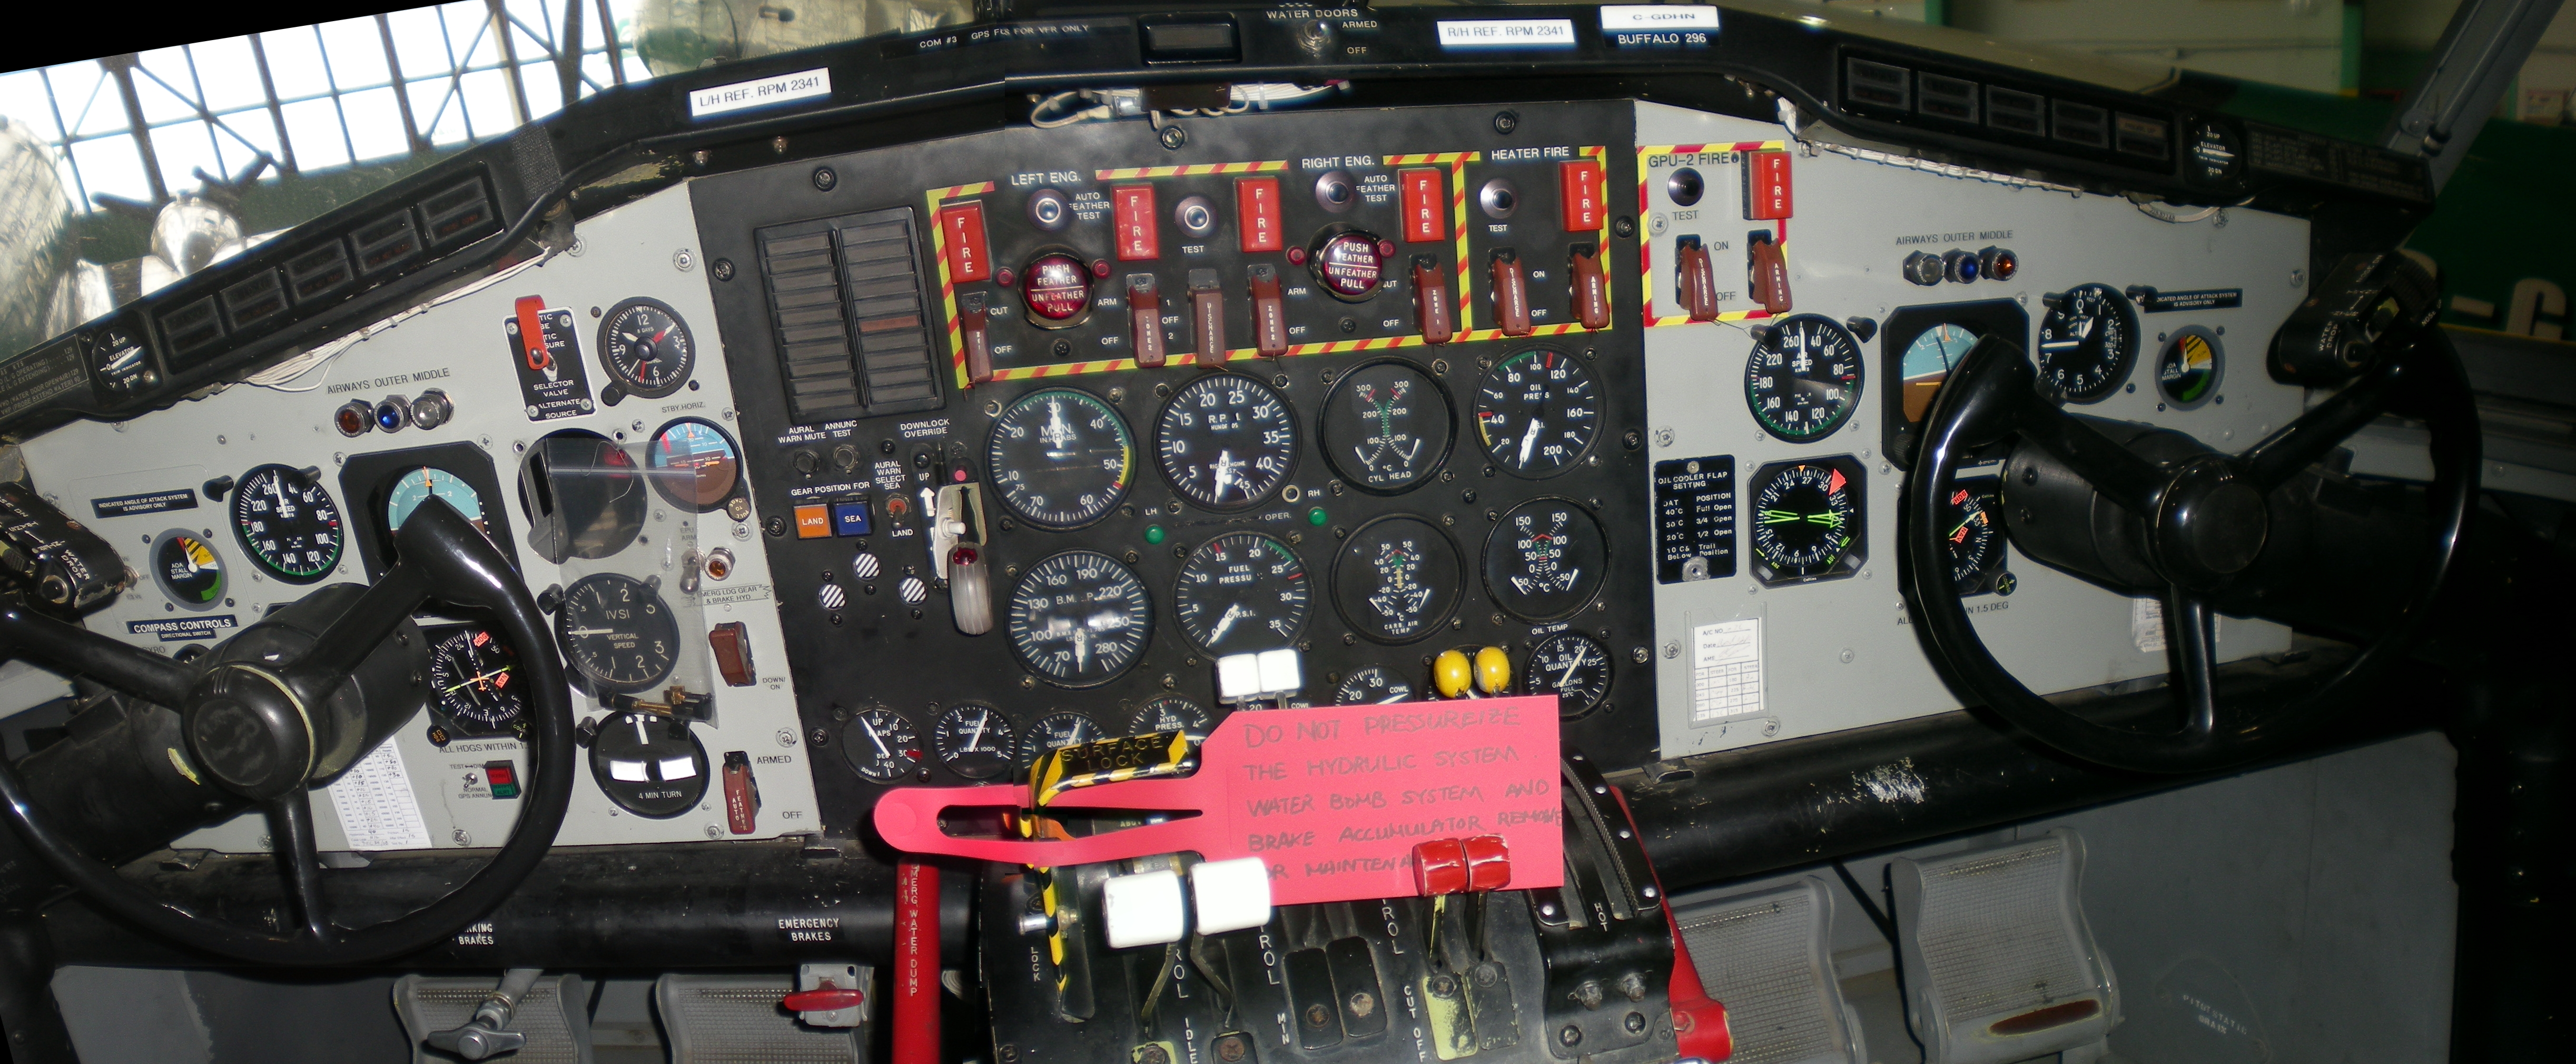 http://upload.wikimedia.org/wikipedia/commons/f/f9/Buffalo_Airways_Canadair_CL-215_cockpit_cropped.jpg